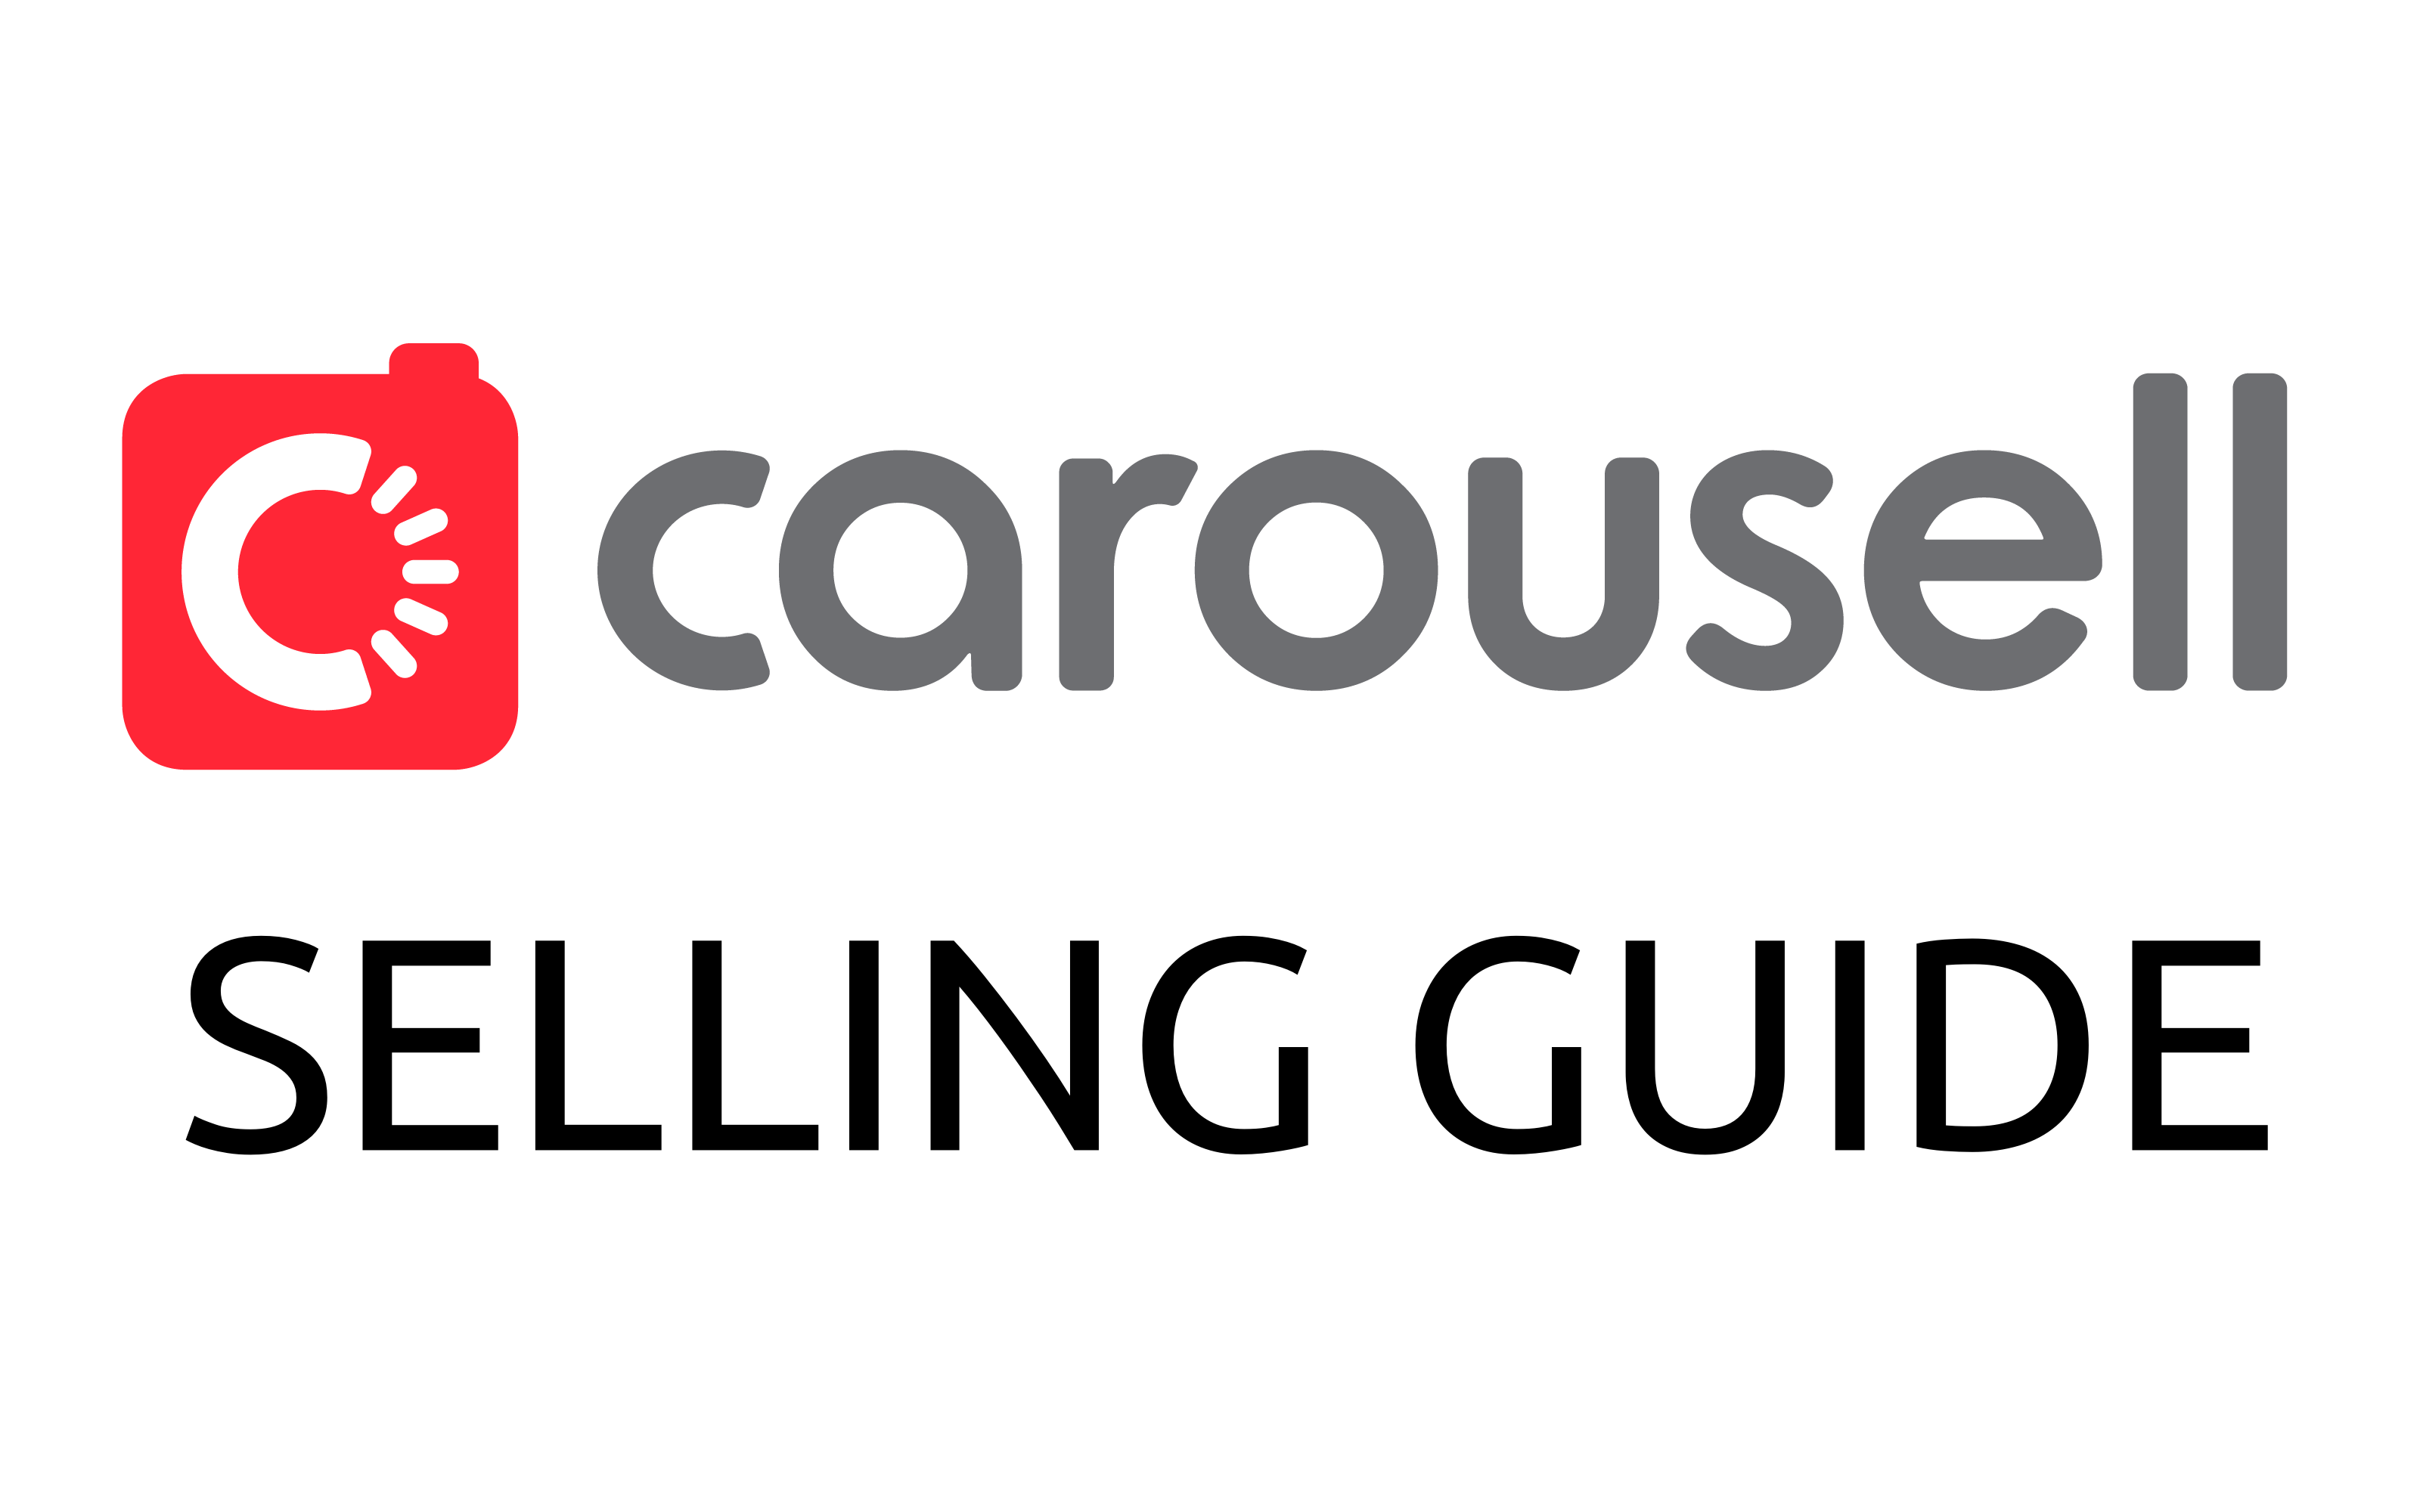 How to sell more on Carousell